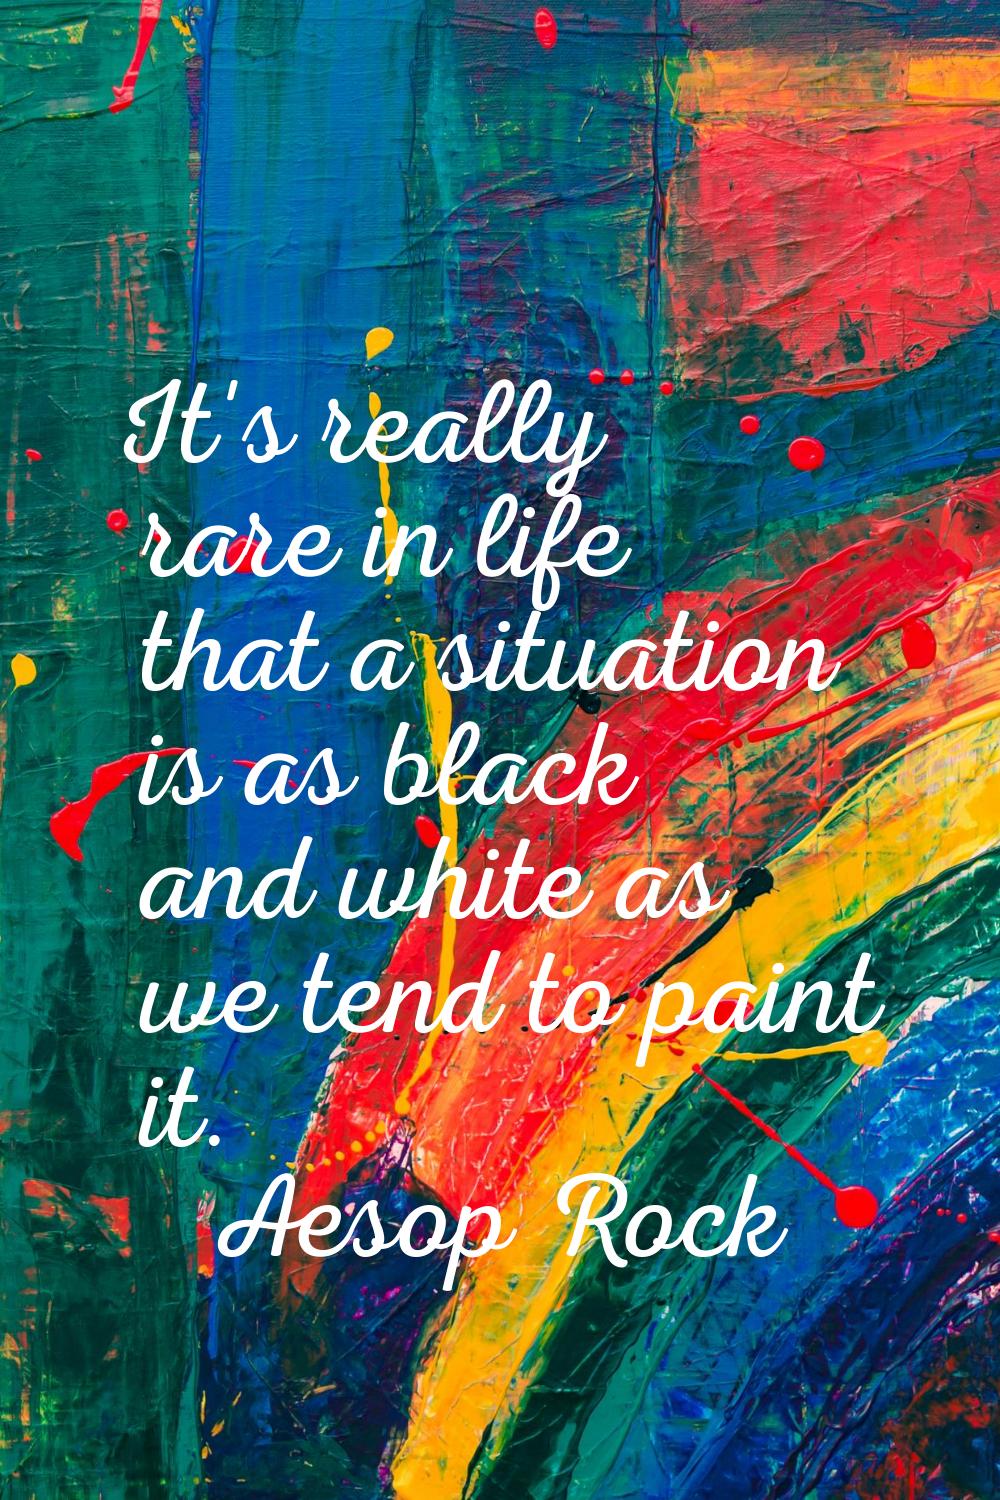 It's really rare in life that a situation is as black and white as we tend to paint it.